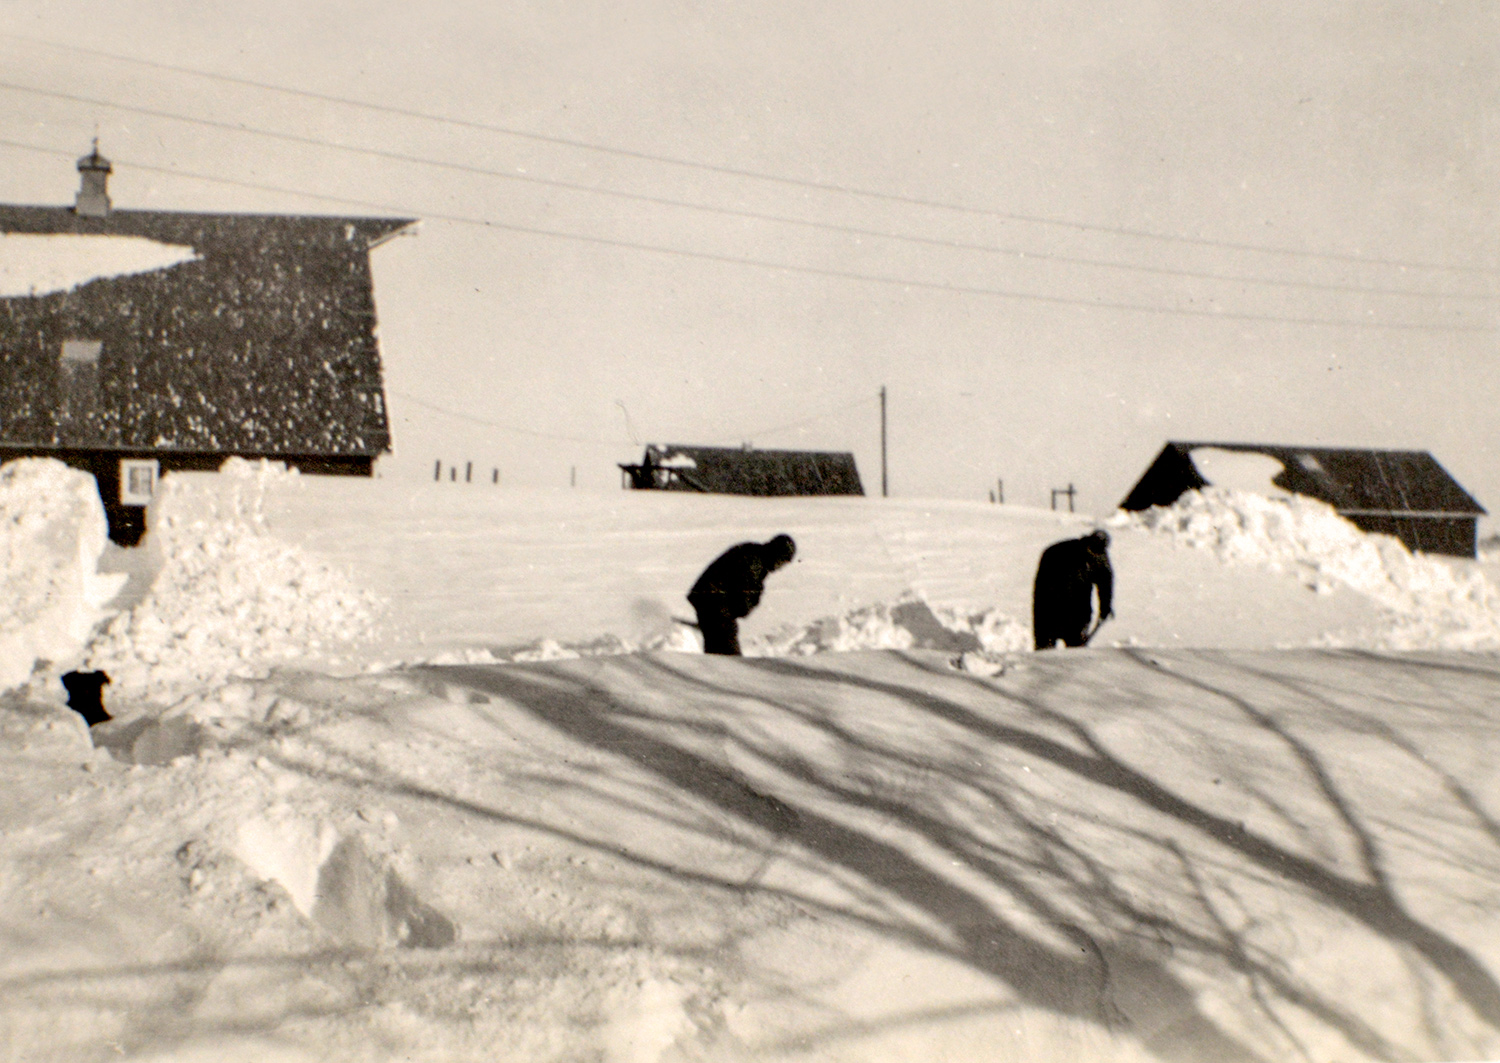 Black and white photo from the 1950s with teenager Duane Sander and a friend shoveling a path through knee-deep snow with farm buildings in the background surrounded by tall snowdrifts. Photo courtesy of Duane Sander.